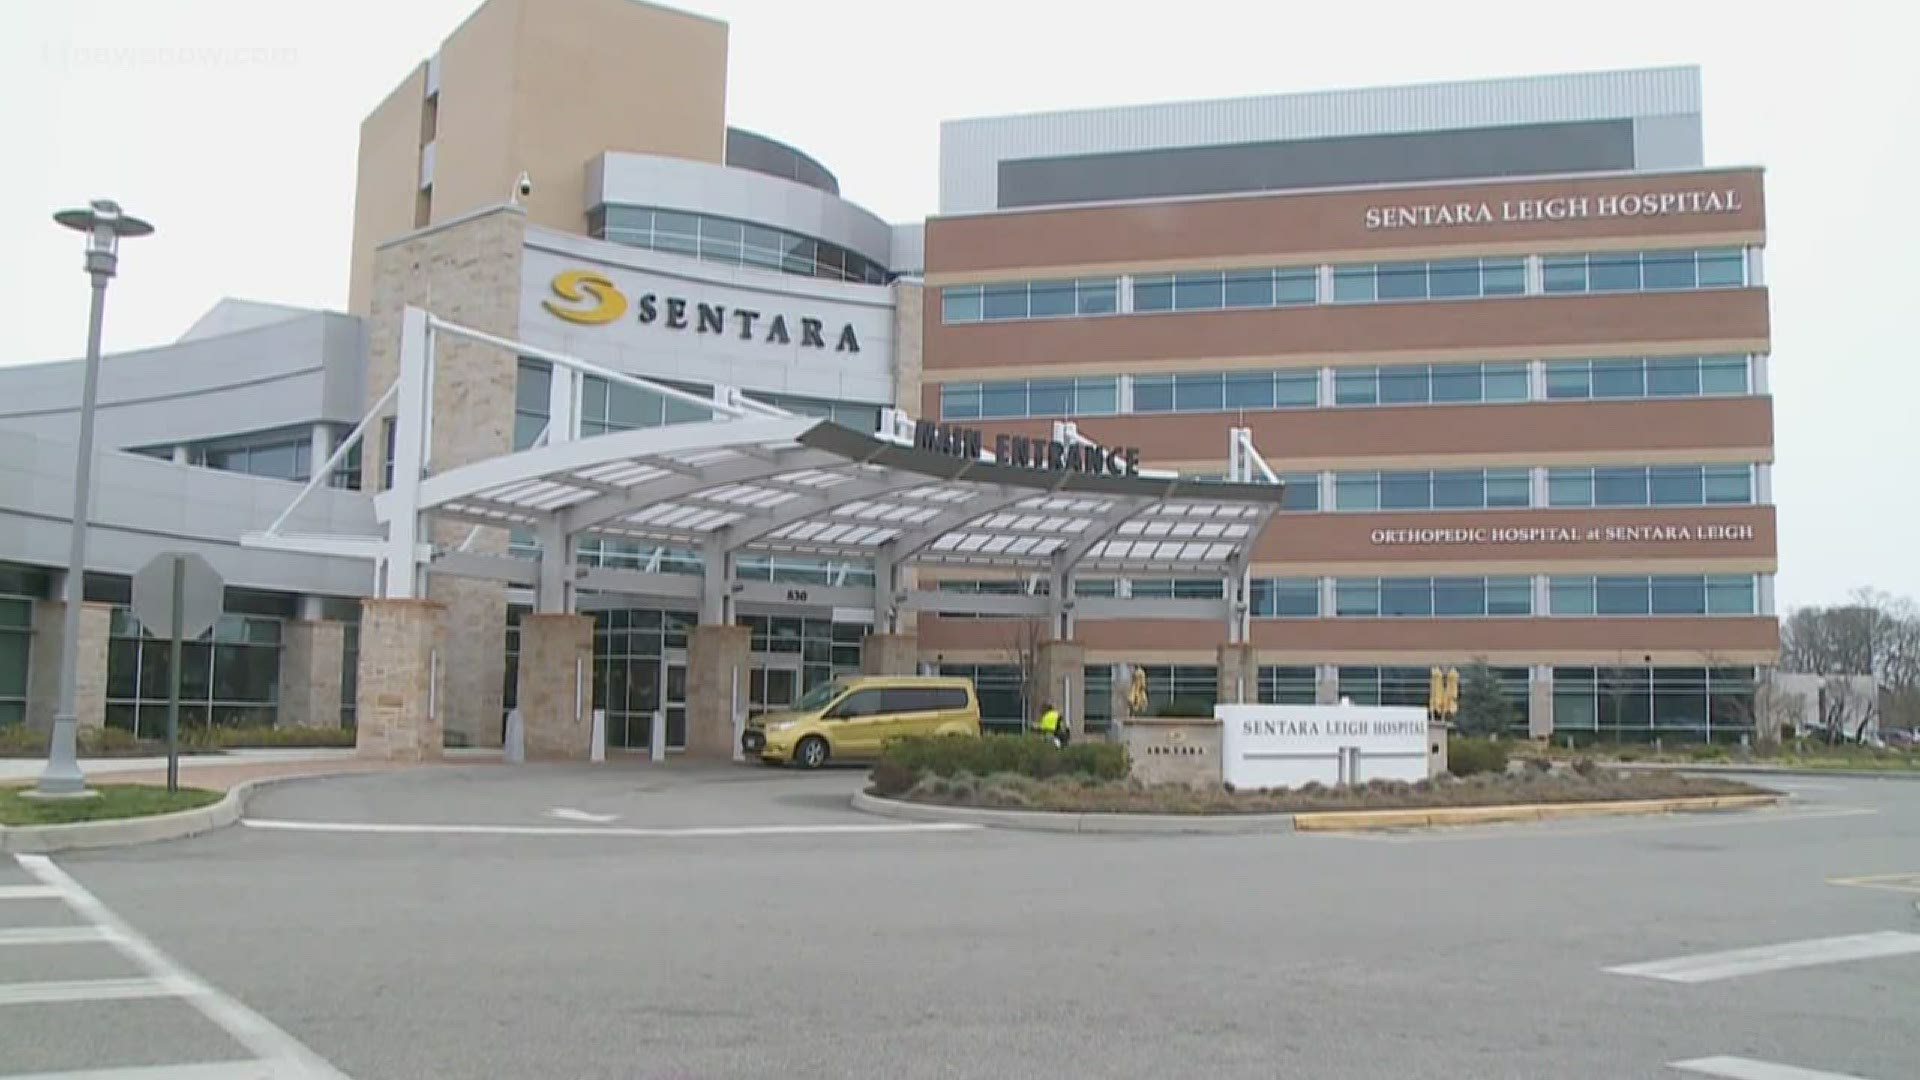 Sentara Healthcare is testing hundreds of people every day for COVID-19. The hospital system said it's found a "new normal" in quickly getting results to patients.